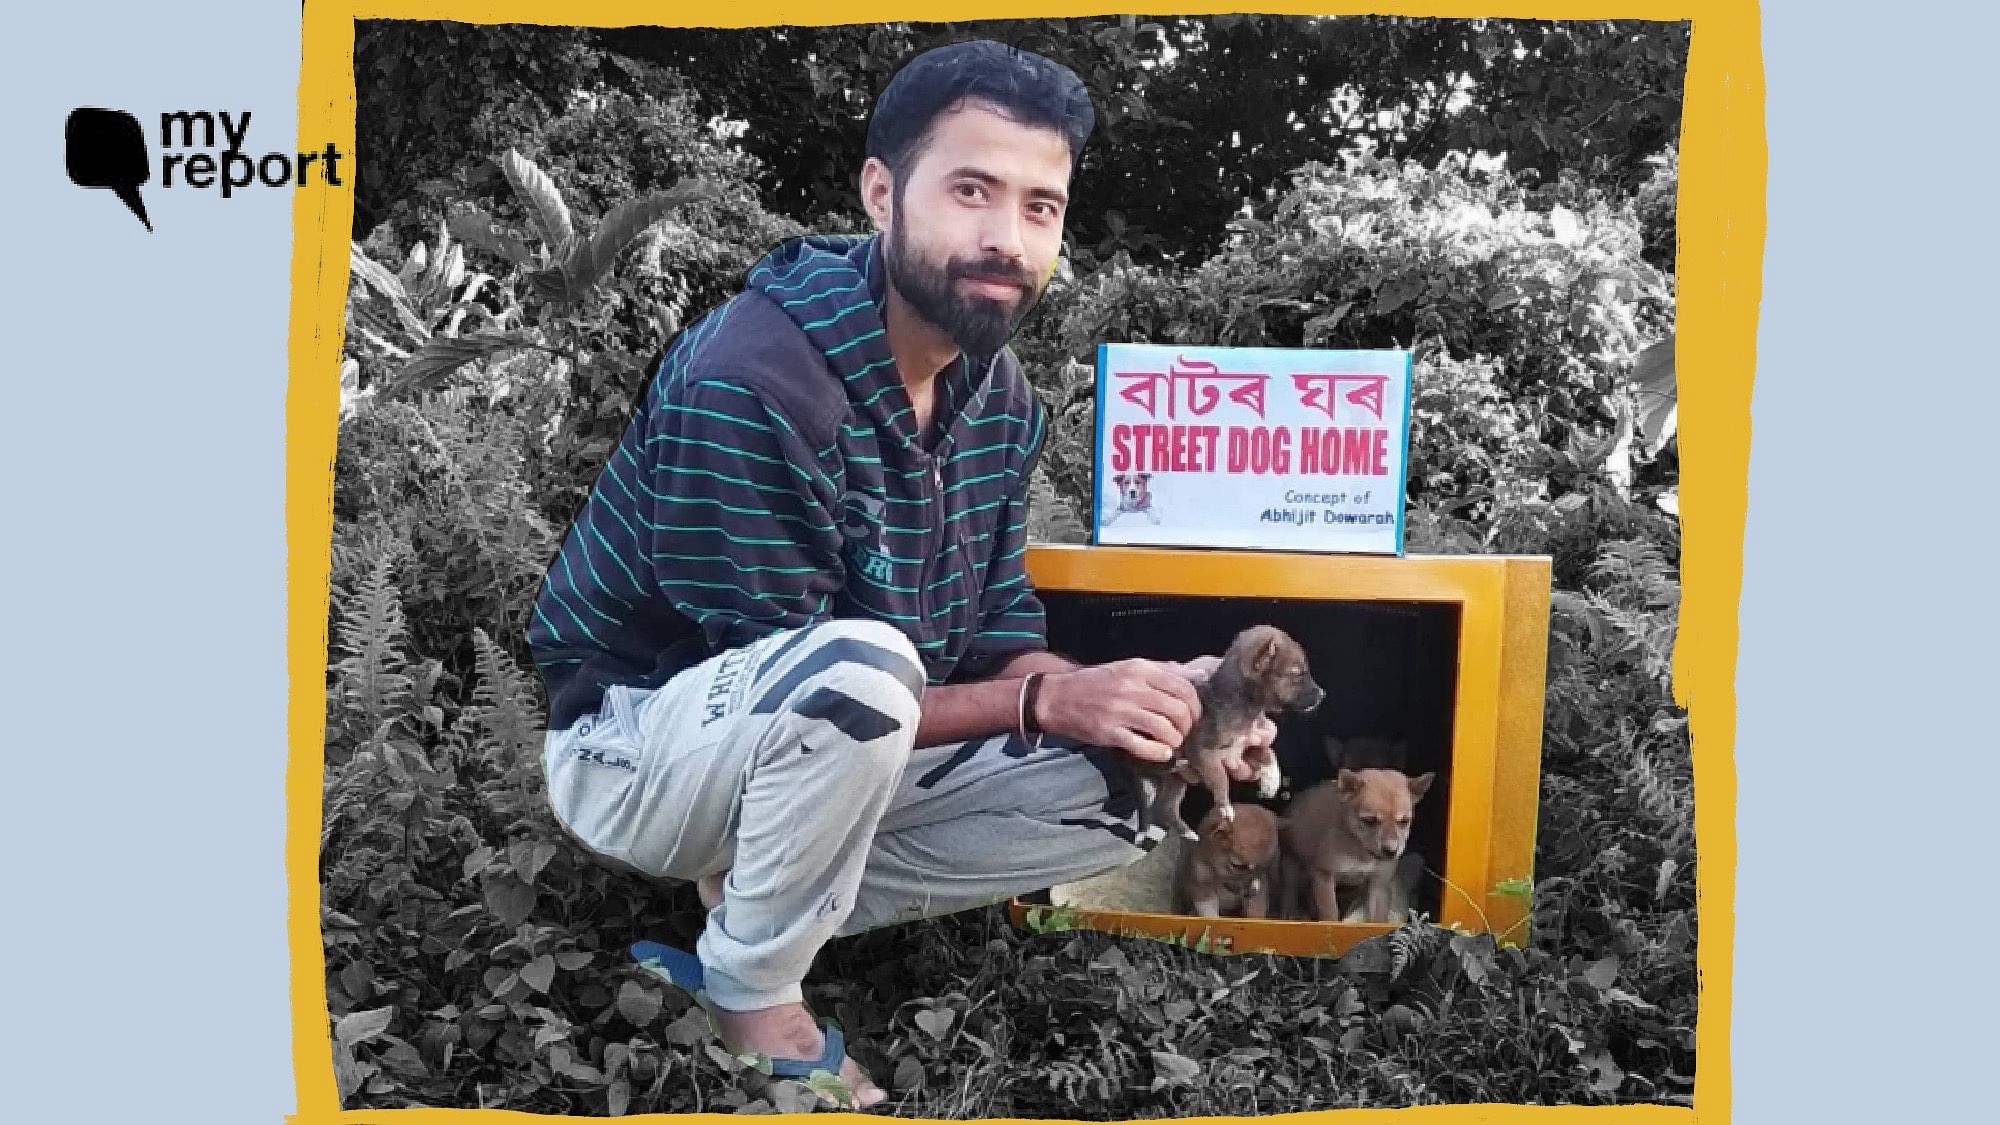  Abhijit Dowarah of Assam is turning old, discarded TV sets into kennels for street dogs in Sivasagar.